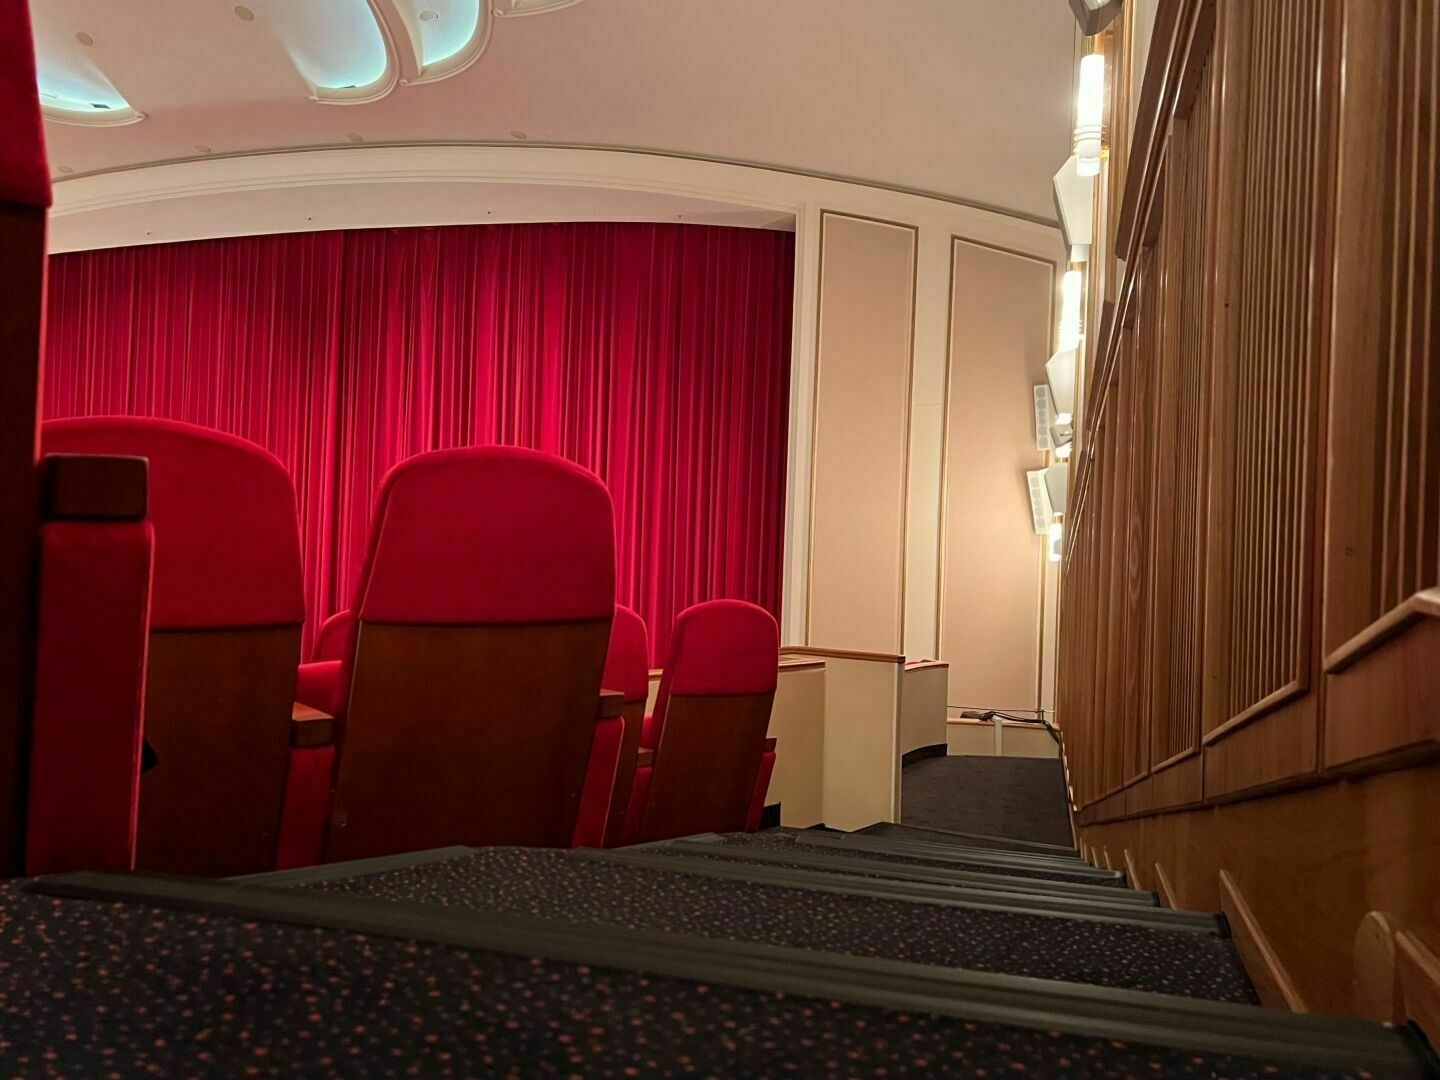 A cinema with a closed curtain, red seats in the foreground.